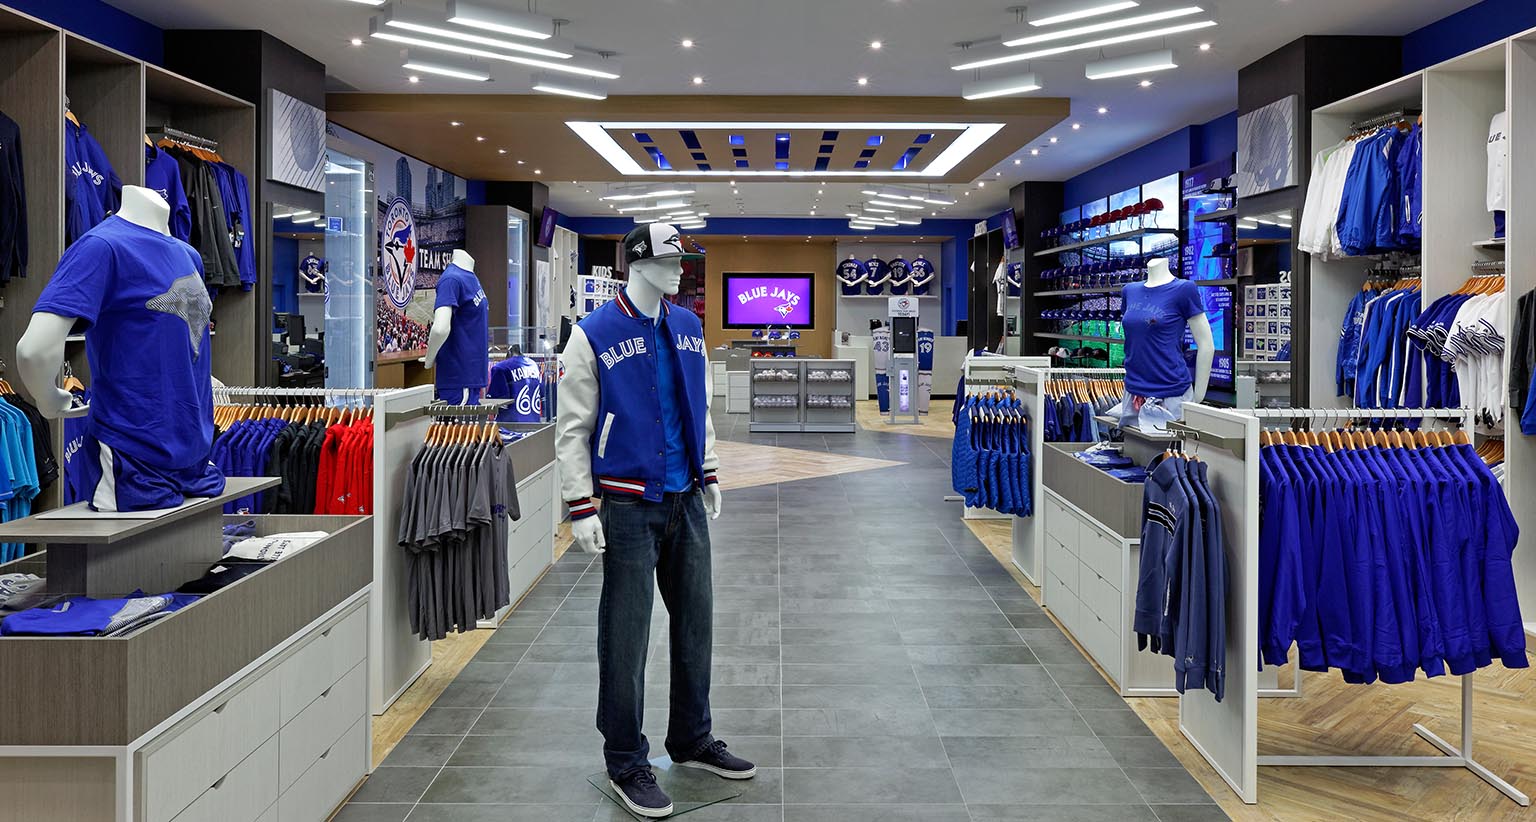 Toronto Blue Jays Store Rogers Centre Store, SAVE 34% 